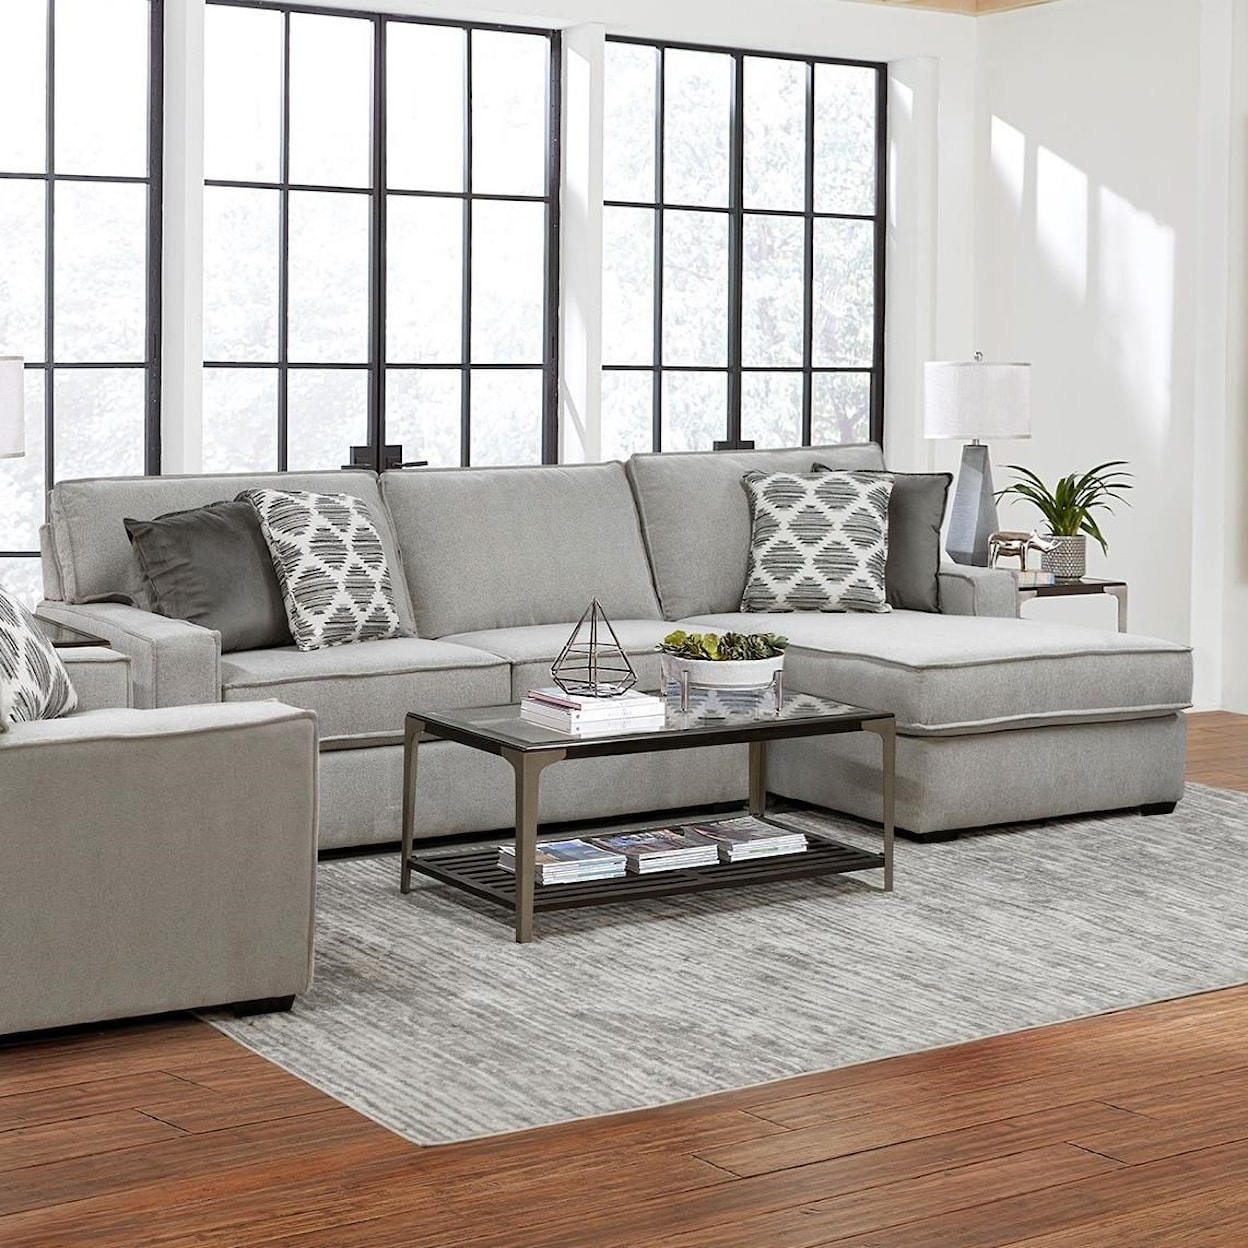 Dimensions 8L00 Series Sectional with Chaise